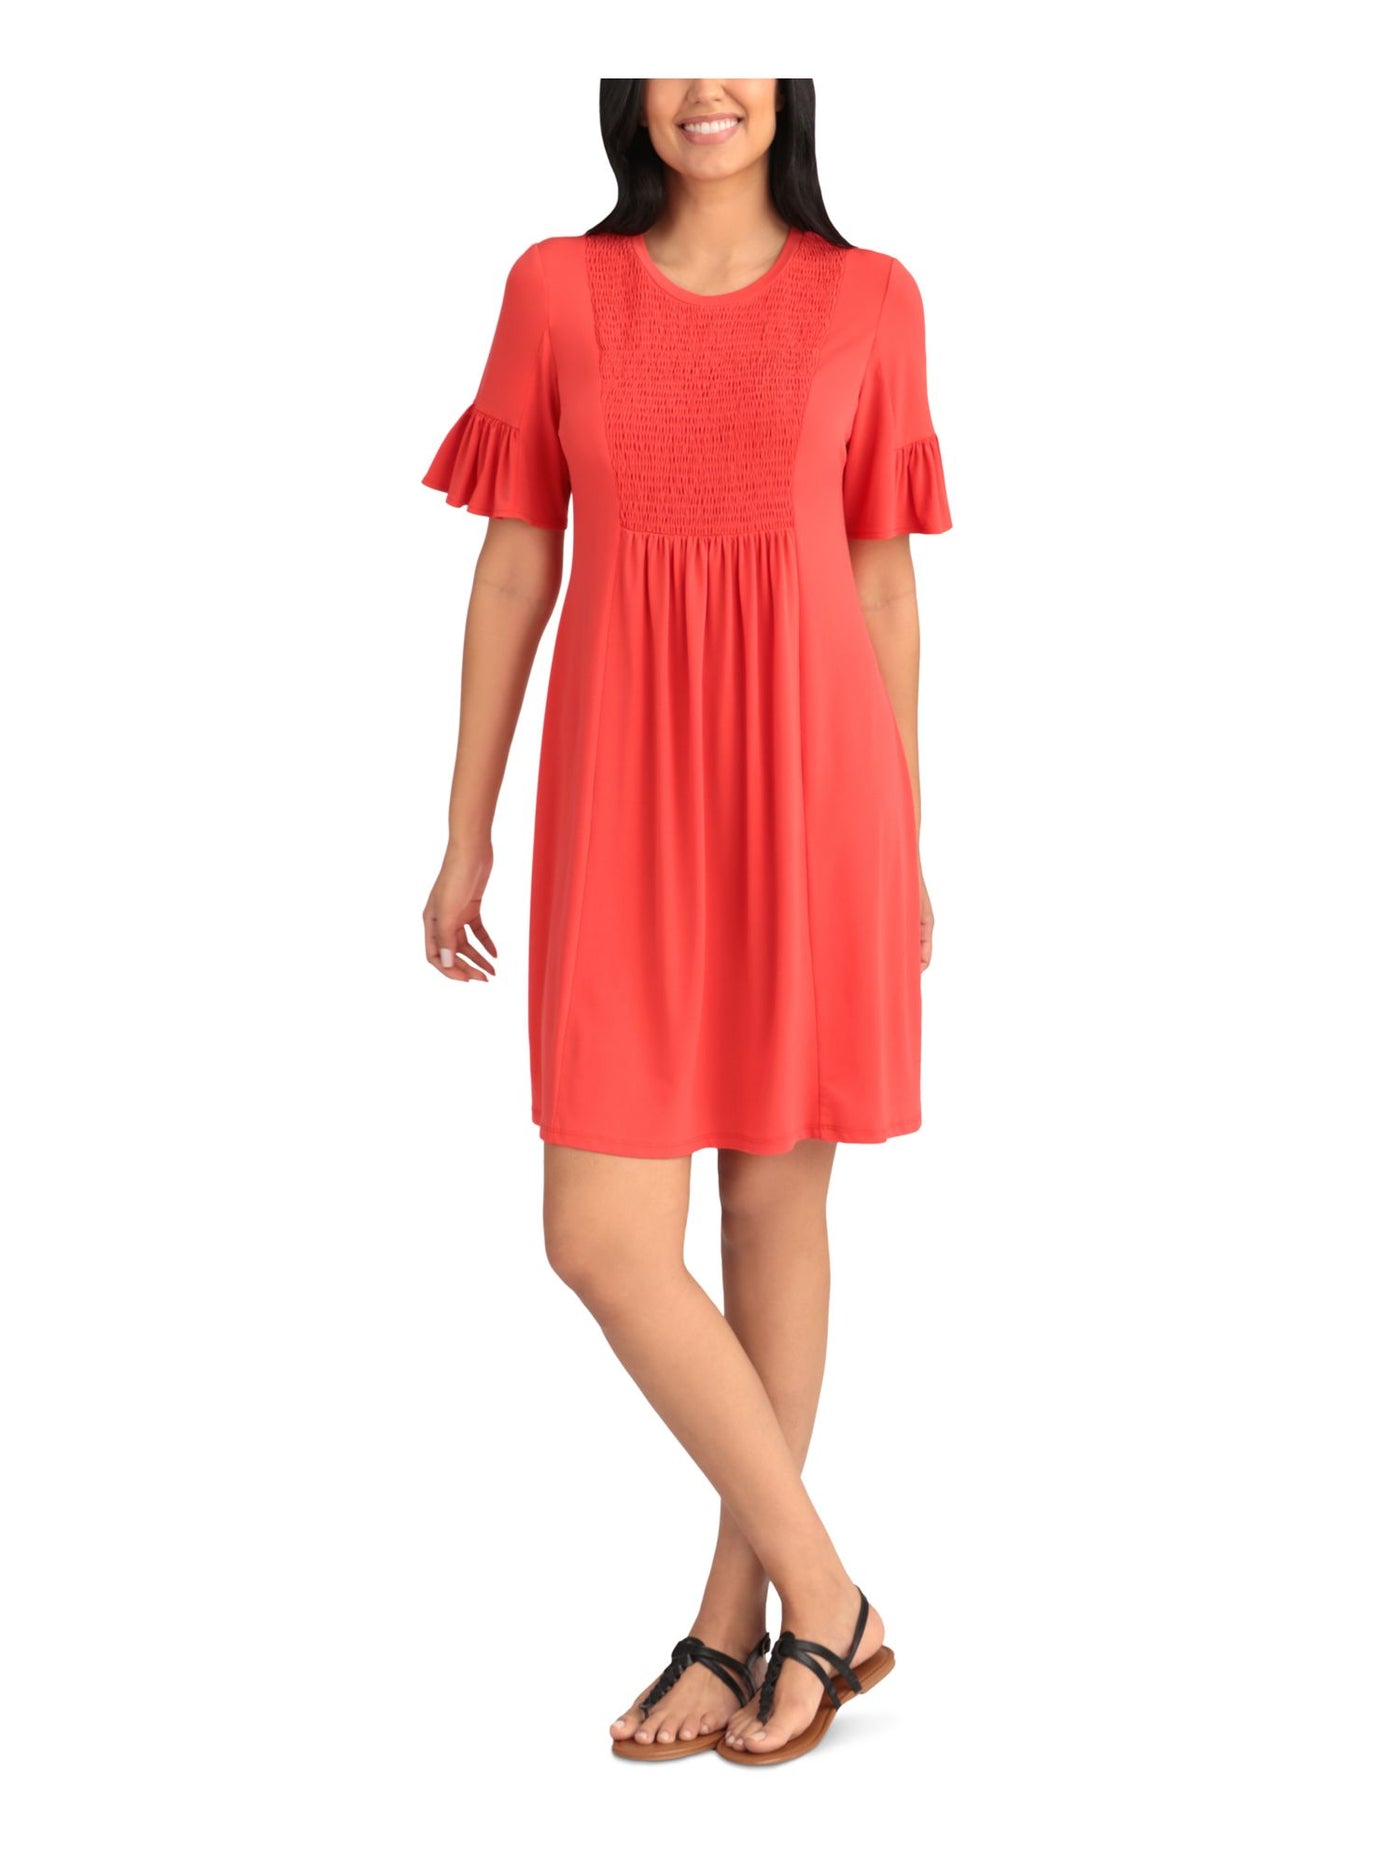 LONDON TIMES Womens Coral Stretch Smocked Ruffled Jersey-knit Short Sleeve Jewel Neck Above The Knee Shift Dress Petites 12P